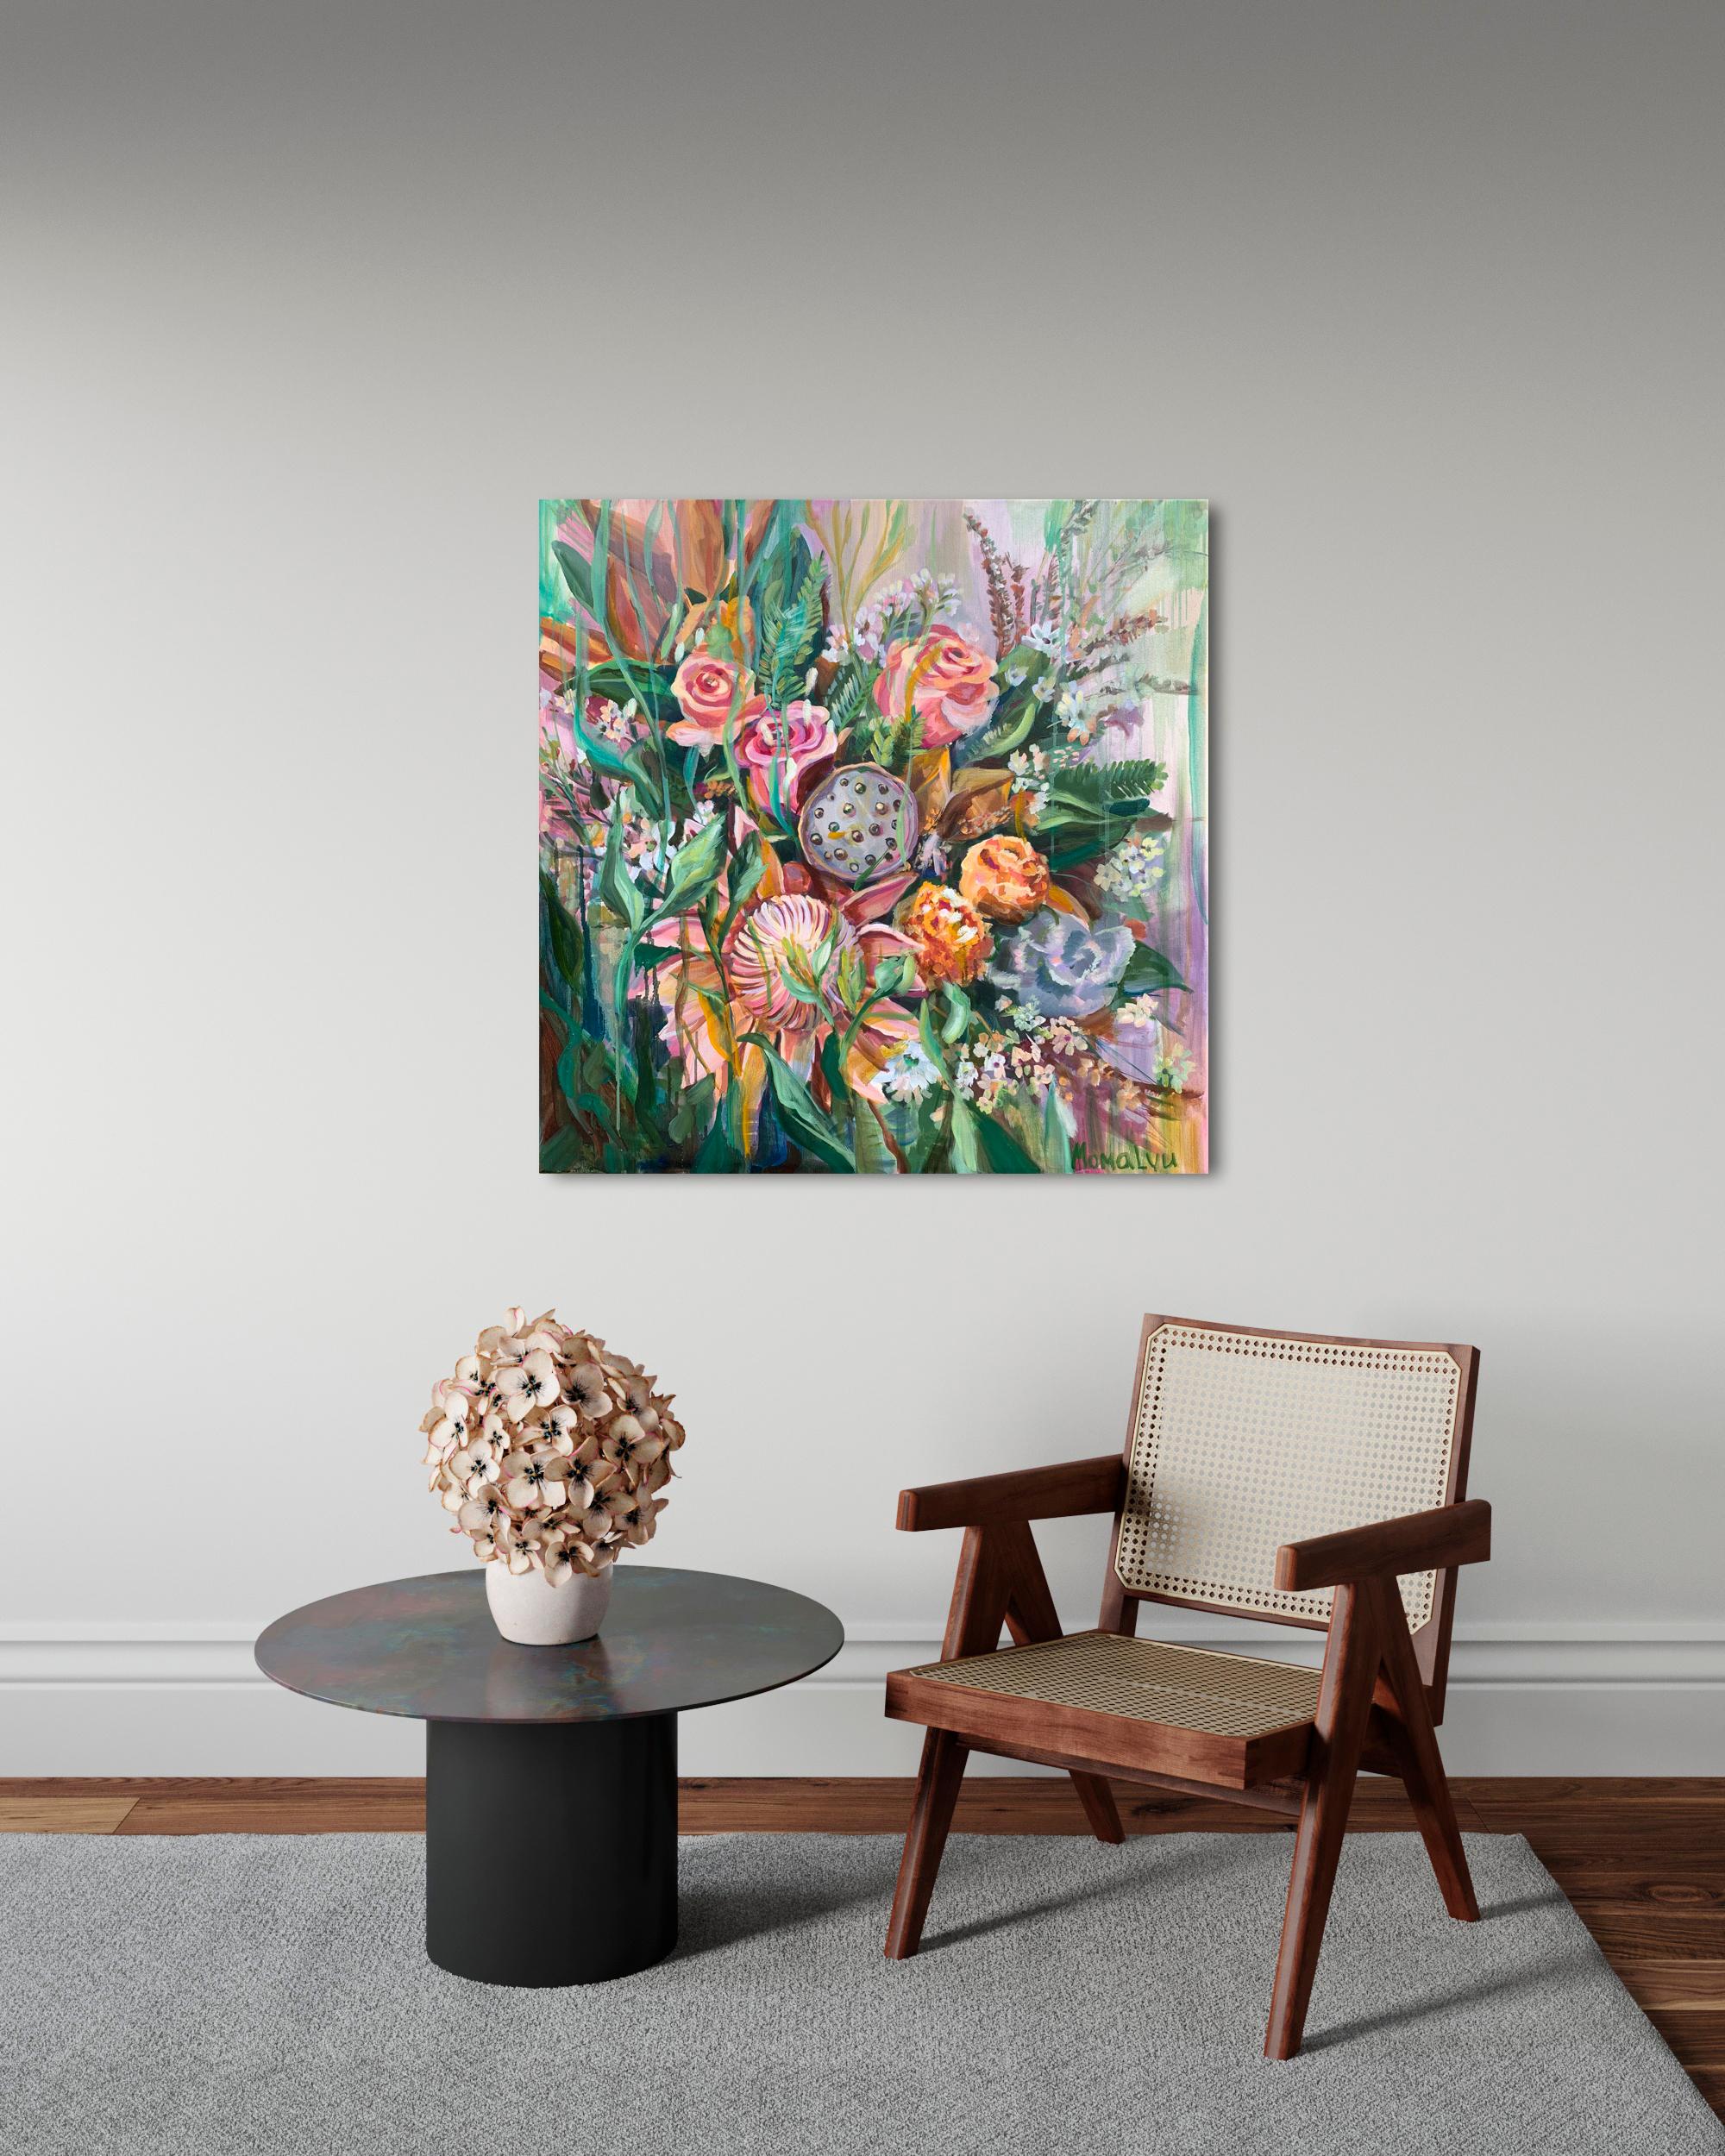 Bright colors of Flowers in bouquet for celebration in the moment. Roses, Protea flowers
 How often do we stay in the moment? Here and now.
- Original oil painting
- 60x60 cm (23.6 x 23.6 inch)
- 1.5 inch thick galley wrapped painted edges - no